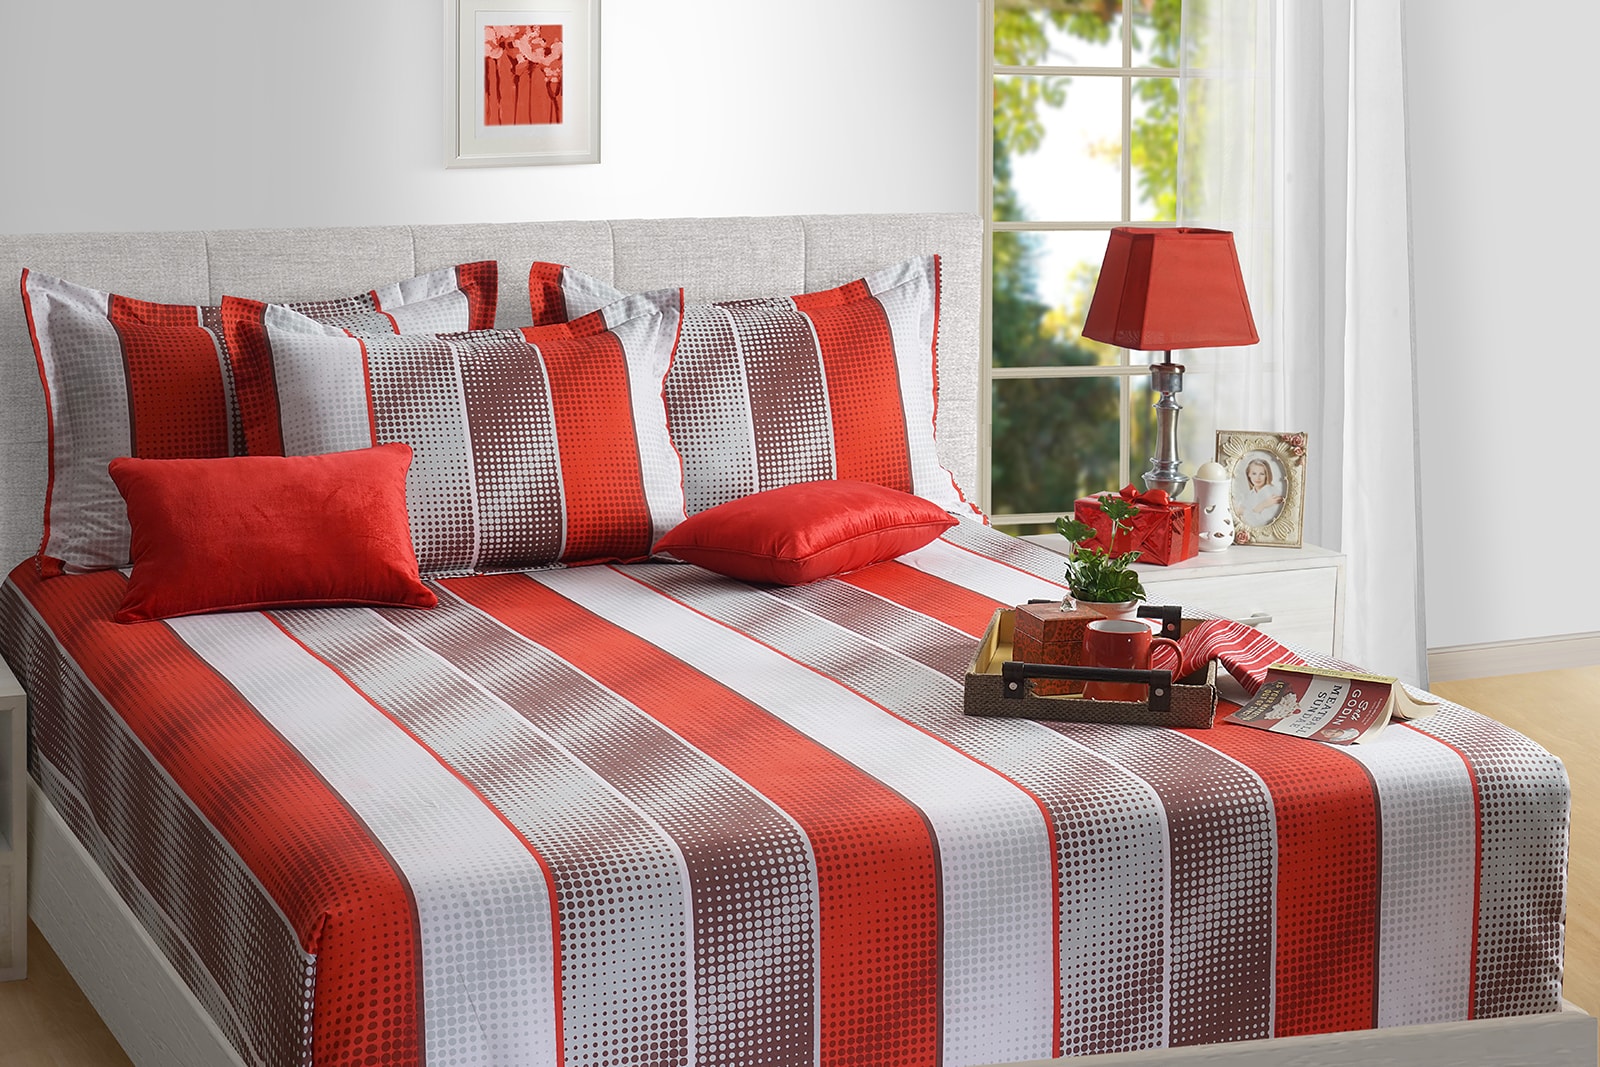 Red & White Bed sheet